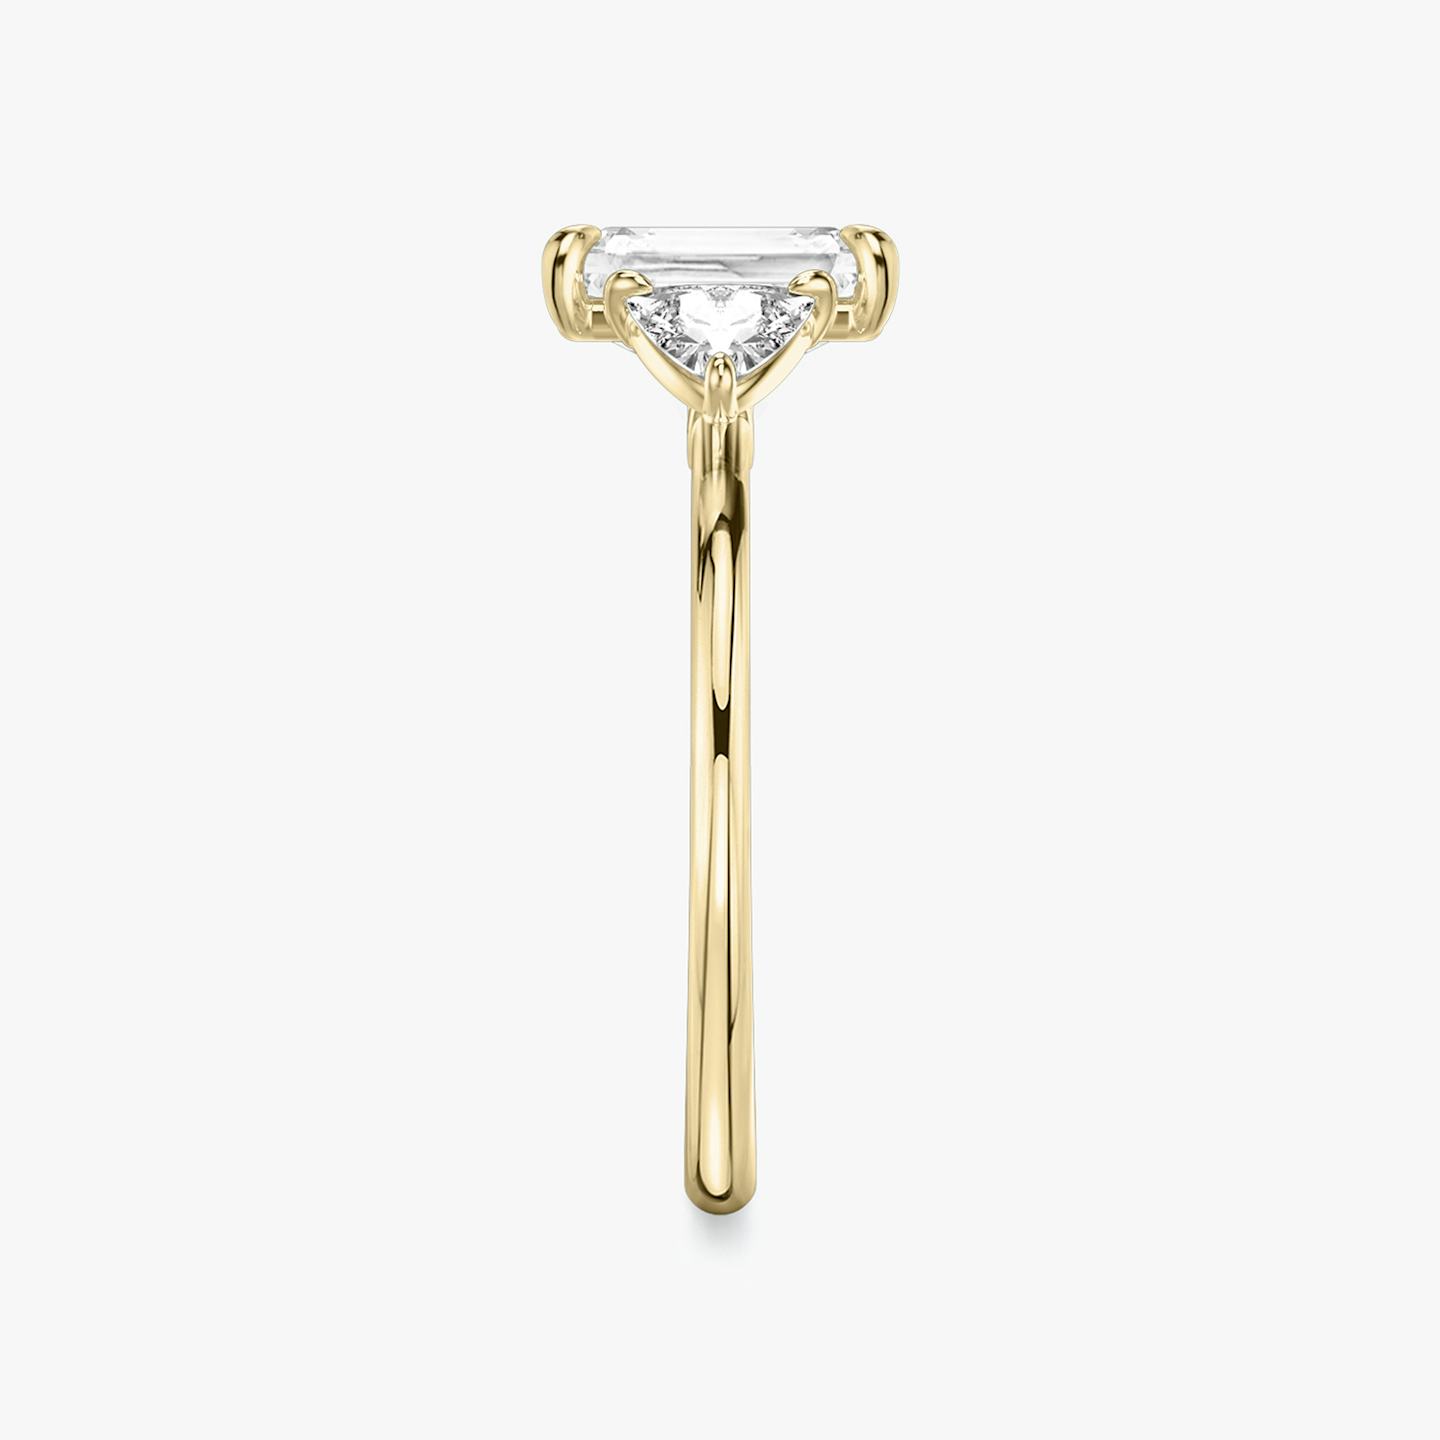 The Three Stone | Radiant | 18k | 18k Yellow Gold | Band: Plain | Side stone carat: 1/4 | Side stone shape: Trillion | Diamond orientation: vertical | Carat weight: See full inventory